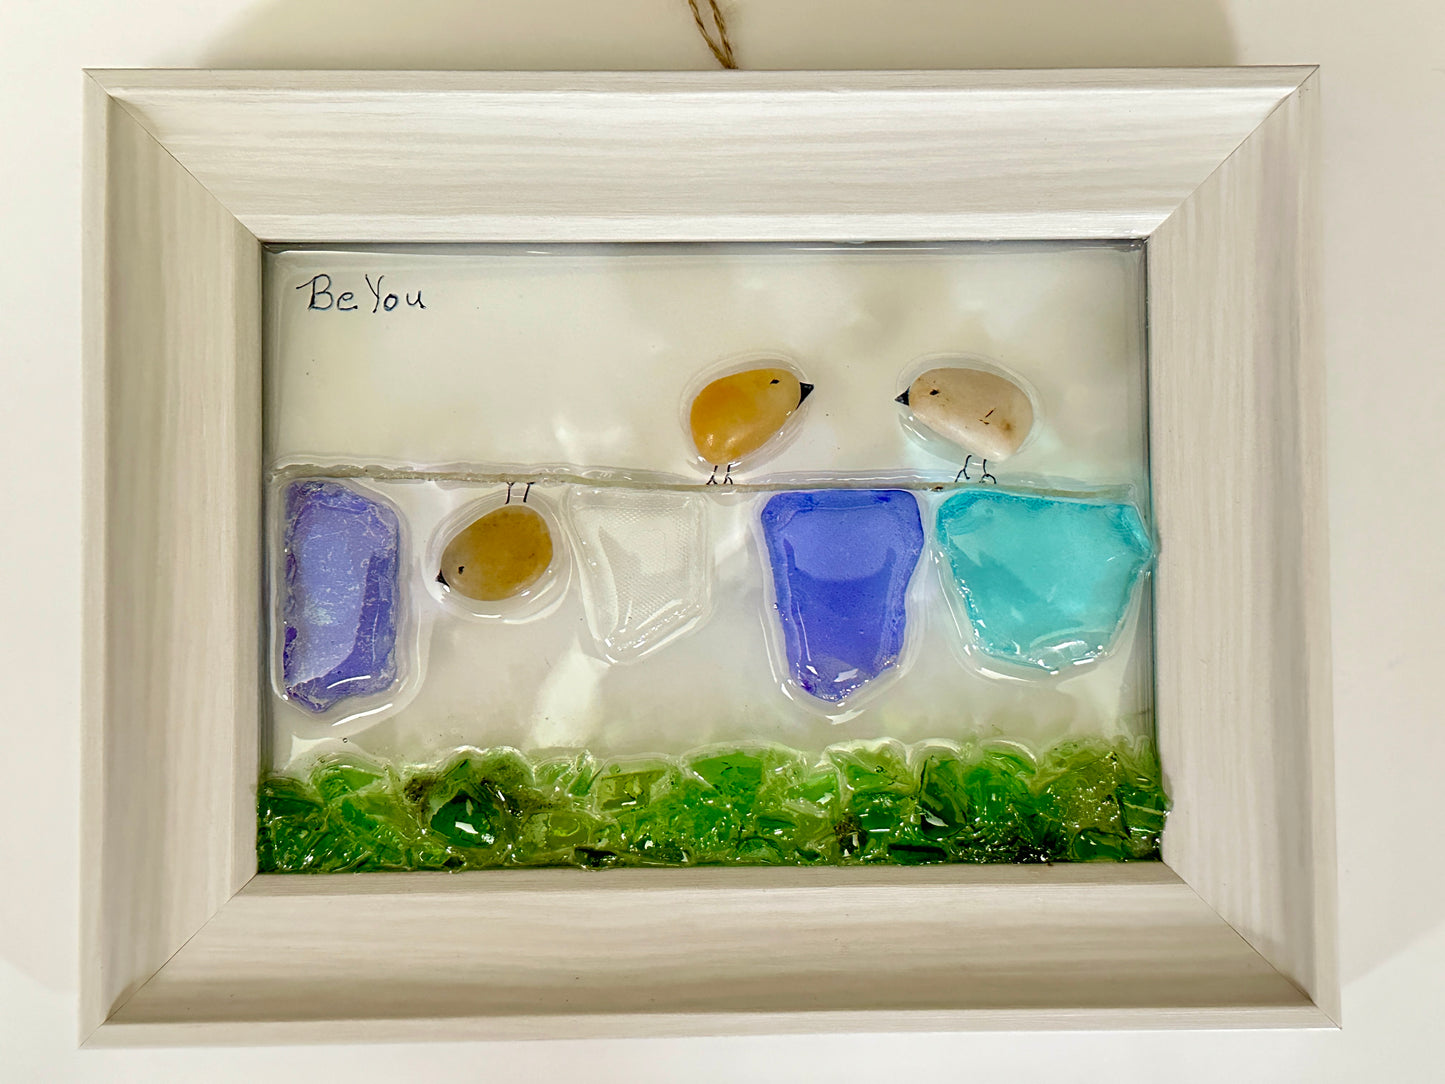 Birds on Clothesline - 'Be You' Resin Art by Becky Polster, Framed in White